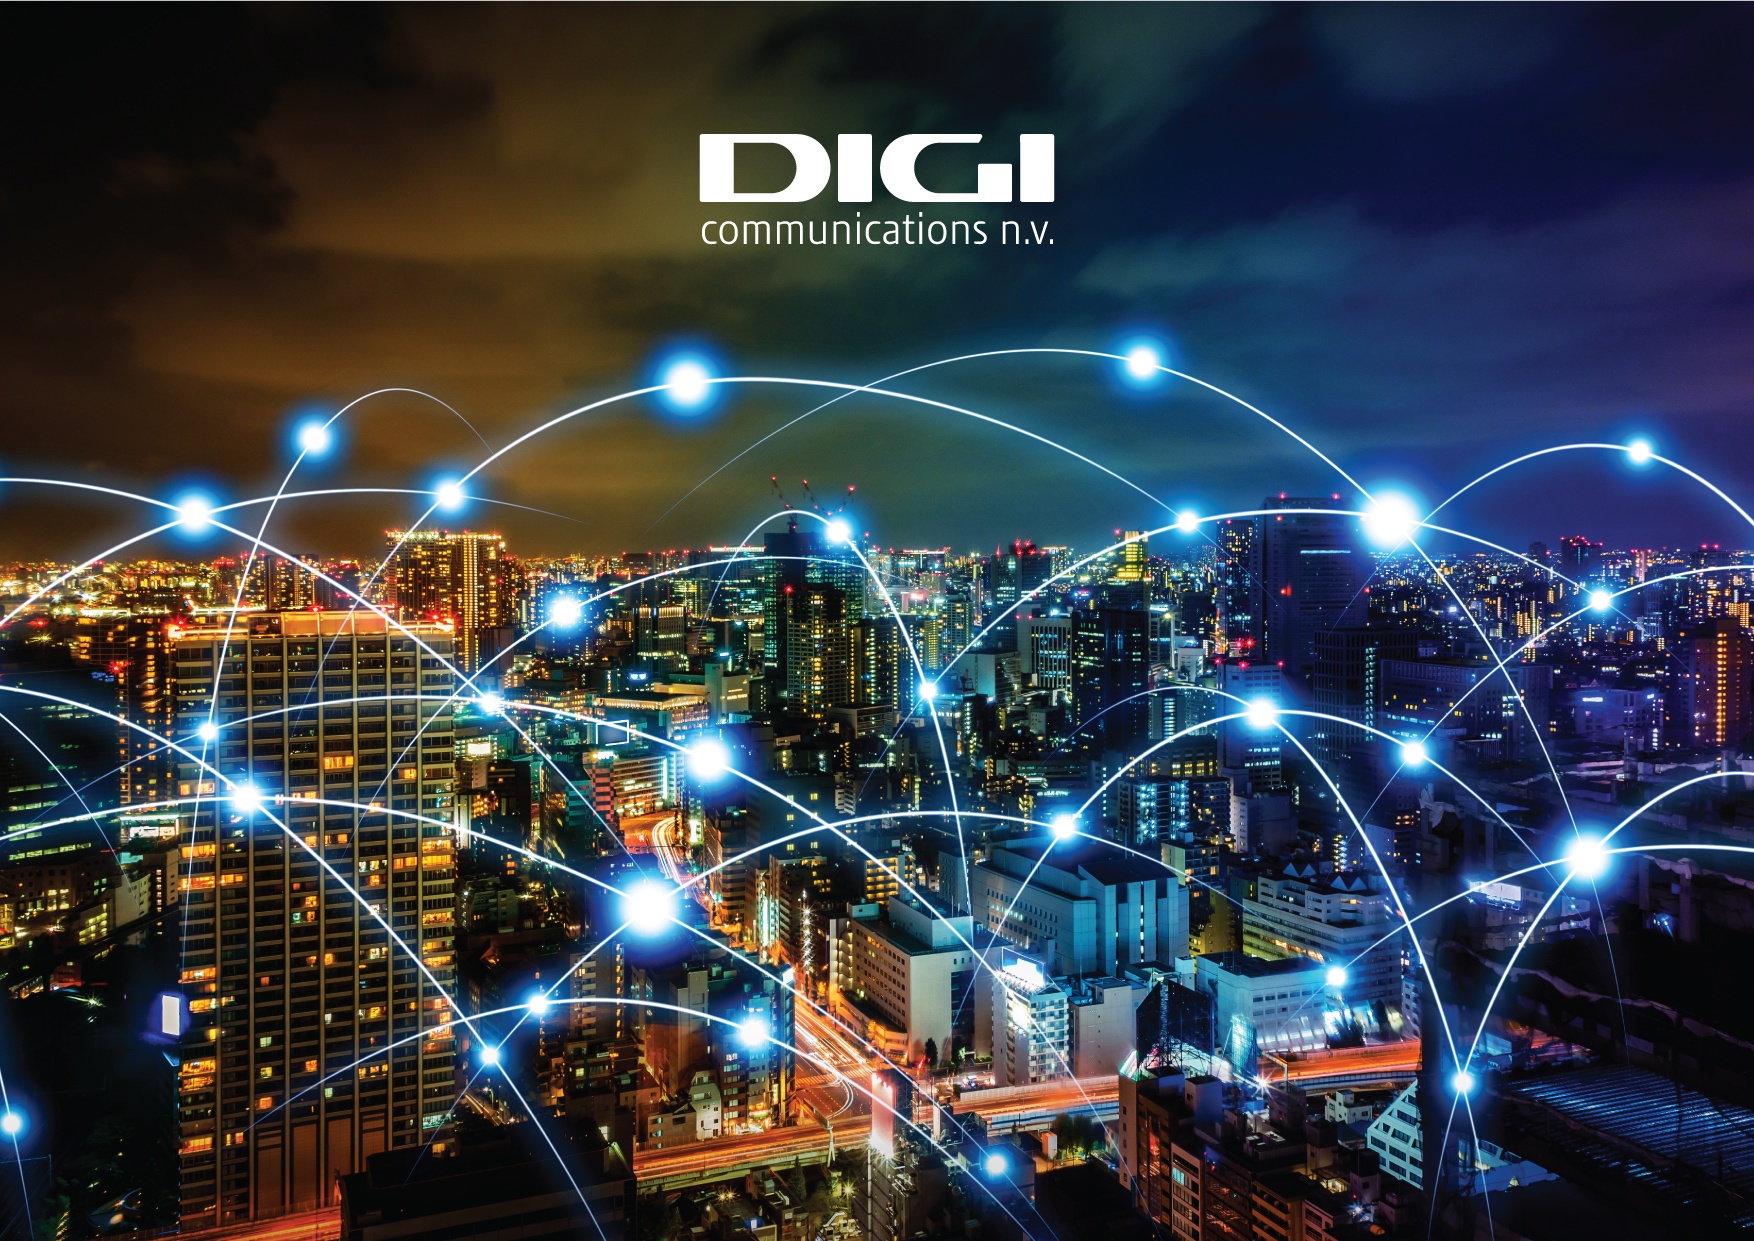 Digi Communications N.V. announces the conclusion by Company’s Portuguese subsidiary of a framework agreement for spectrum usage rights